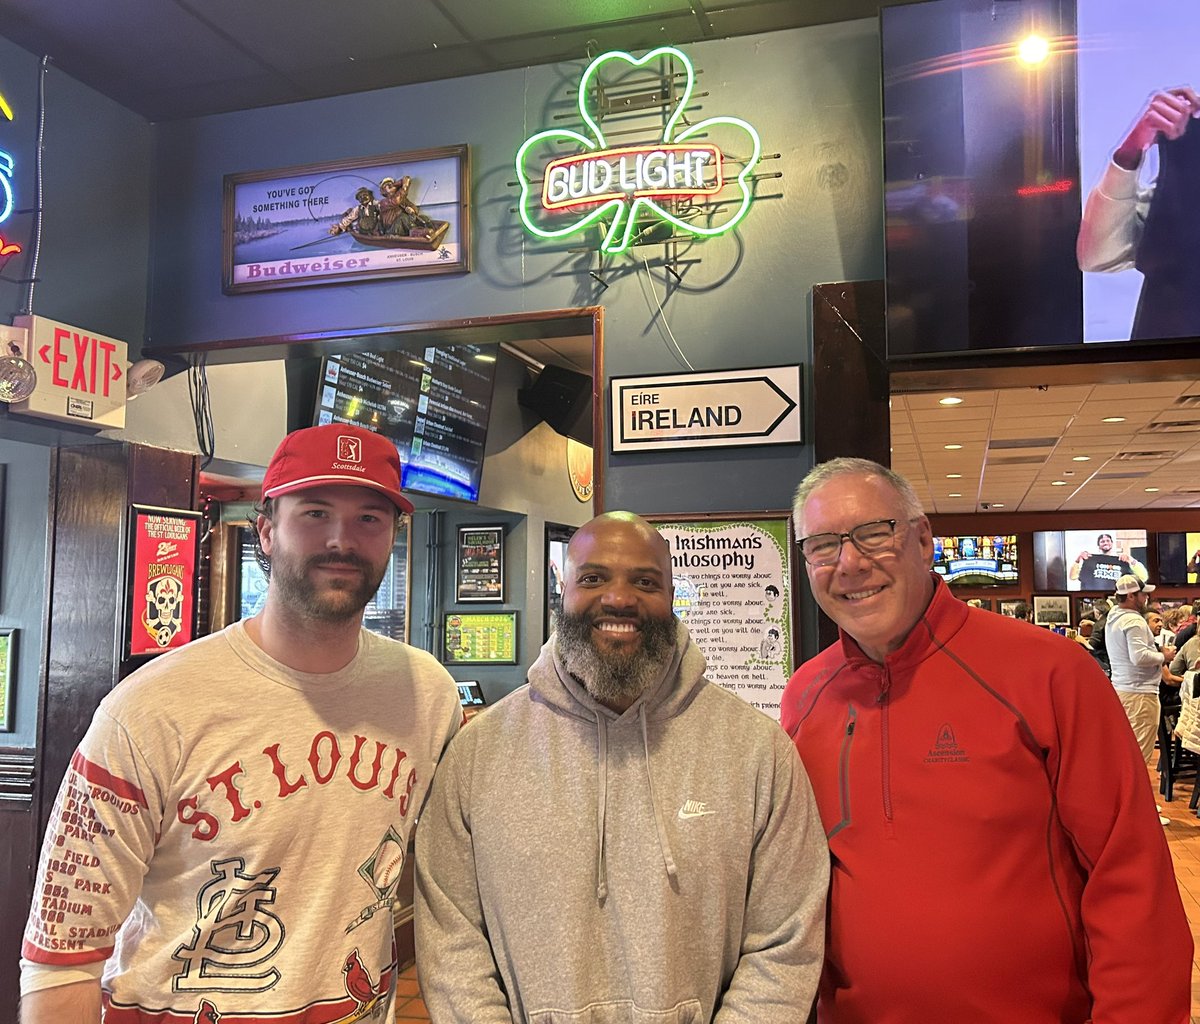 Hanging out with the @101espn Fast Lane guys again at @helenfitzgeralds @_MarshyMarsh_ and @Careydavis38 kind enough to let me participate. We will be here watching the NCAA tournament until 6:00. Stop by and enjoy a cold Bud Light .